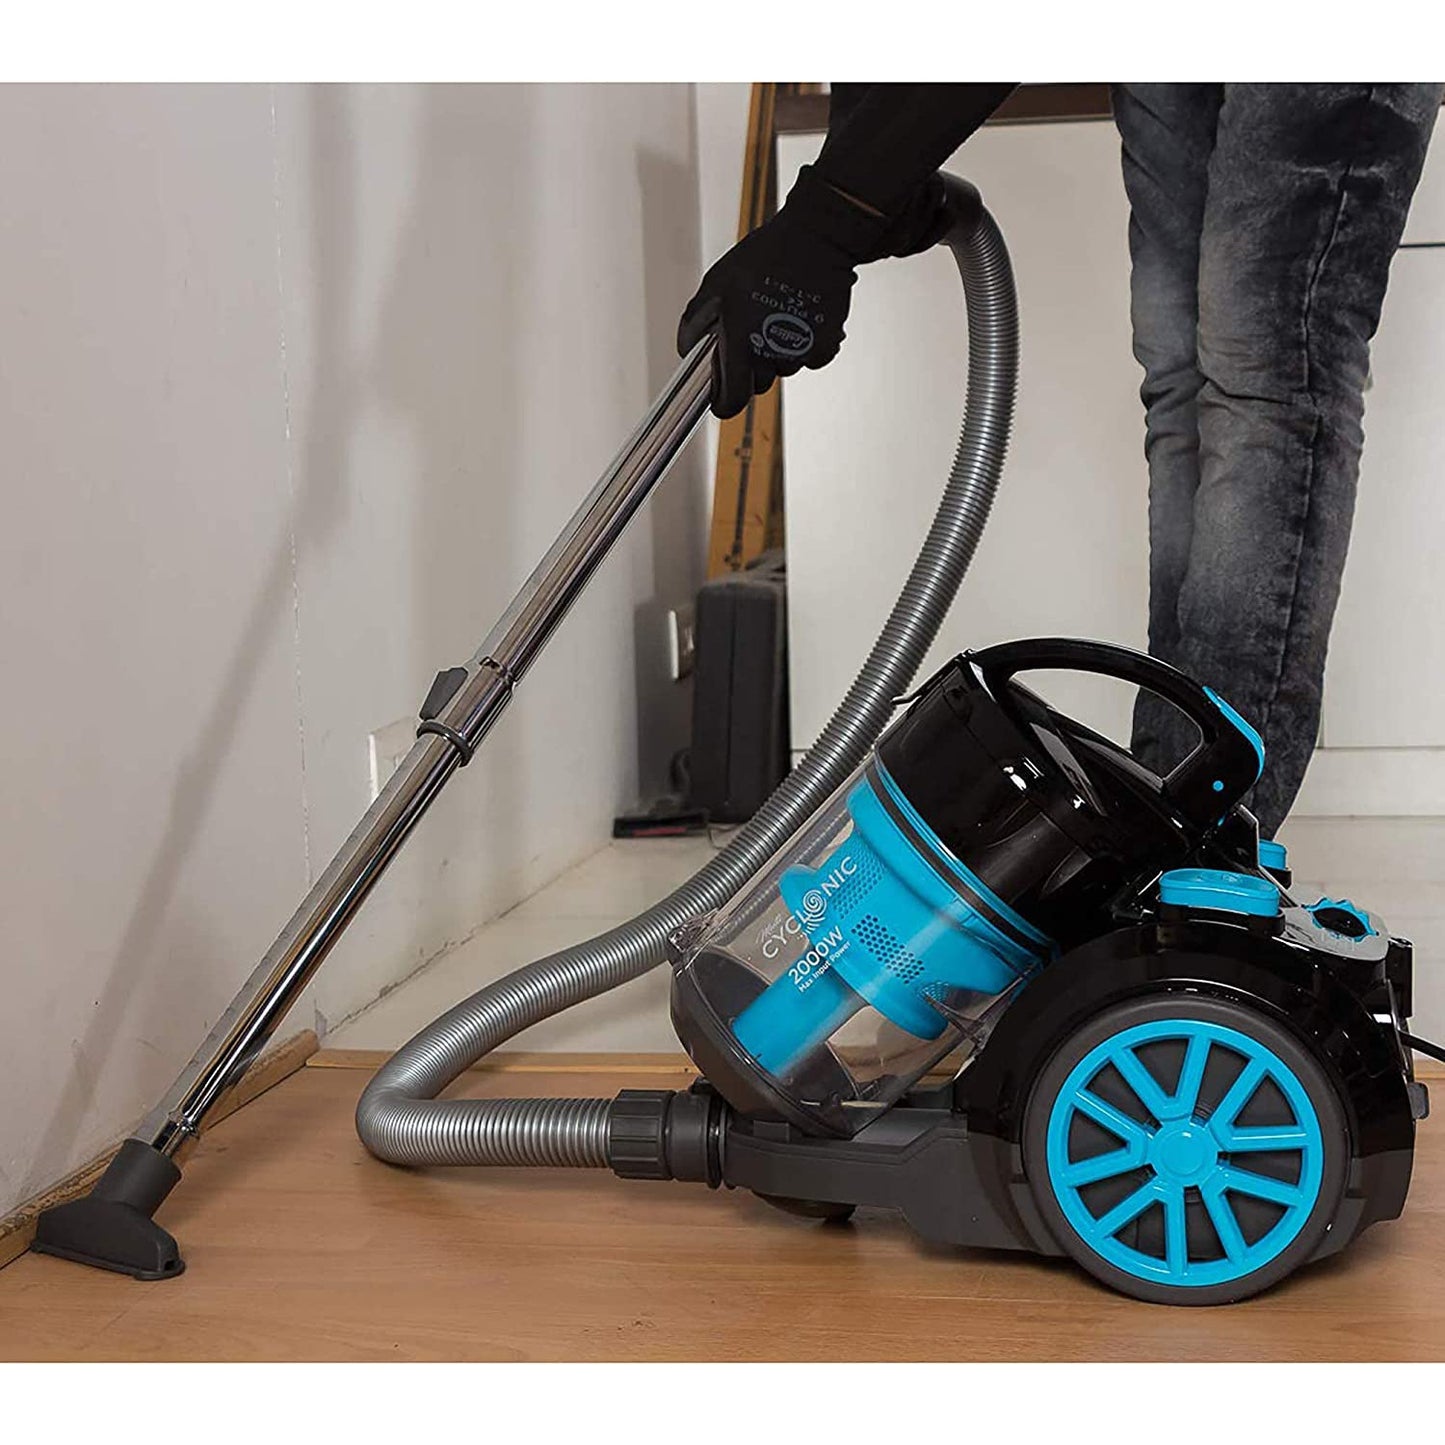 Vacuum cleaner with 6 filters, multi-cycle, 2000 watts – Mega Hardware